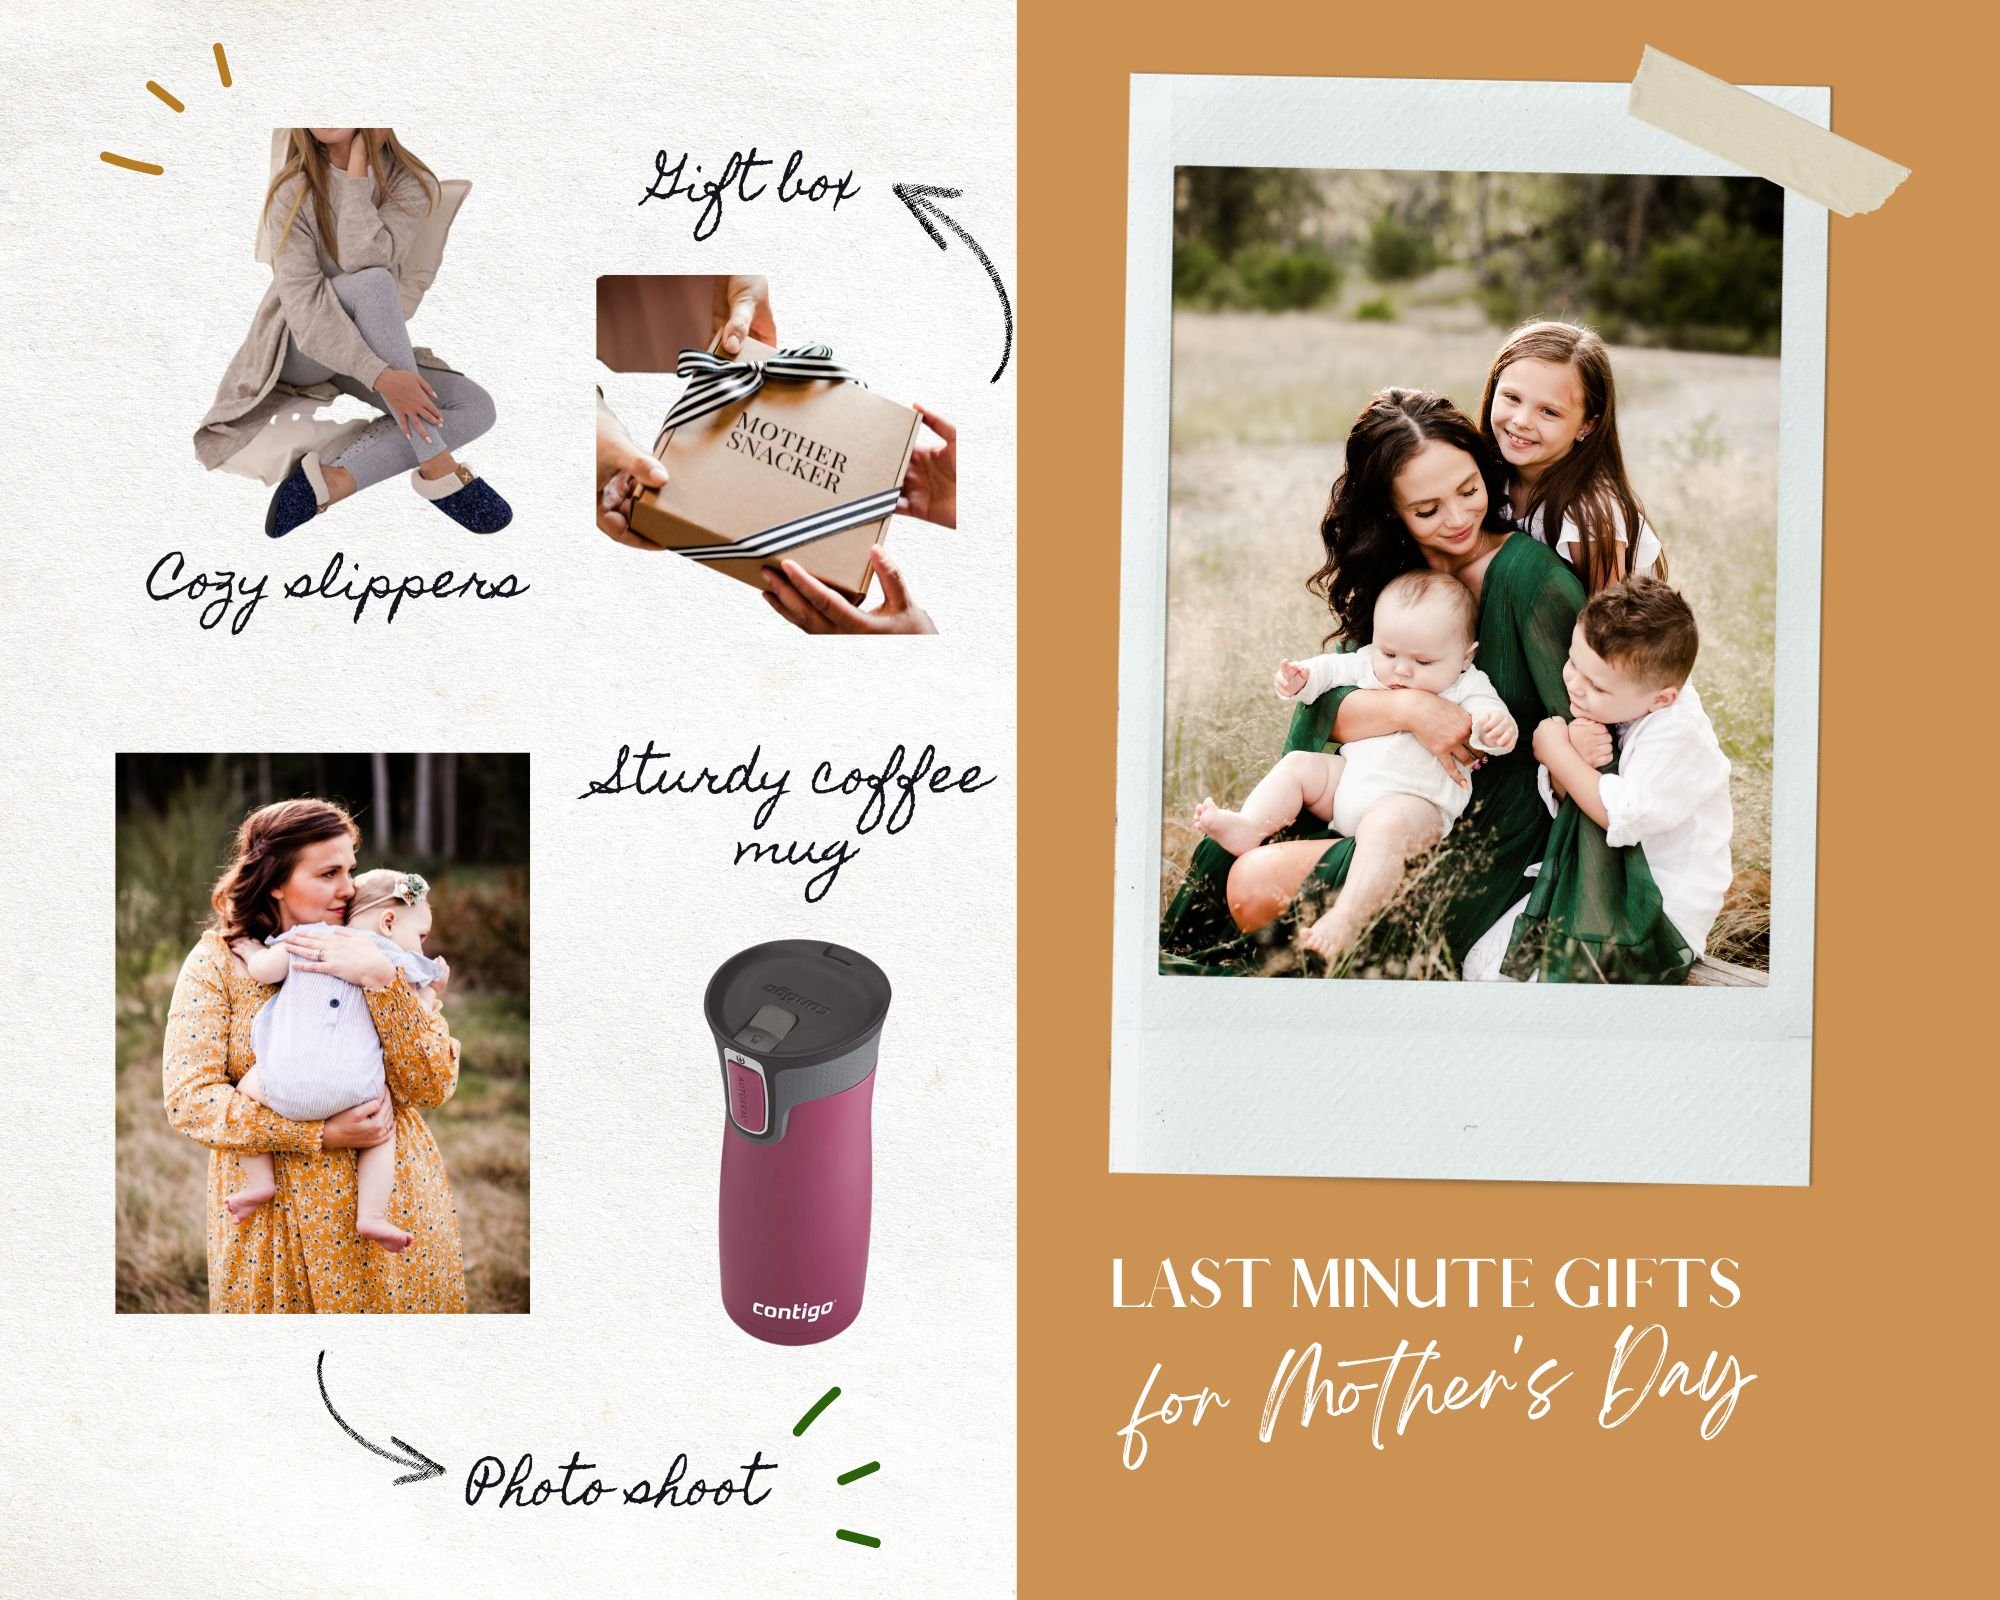 The Best Last Minute Gifts You Can Get Your Mom or Wife for